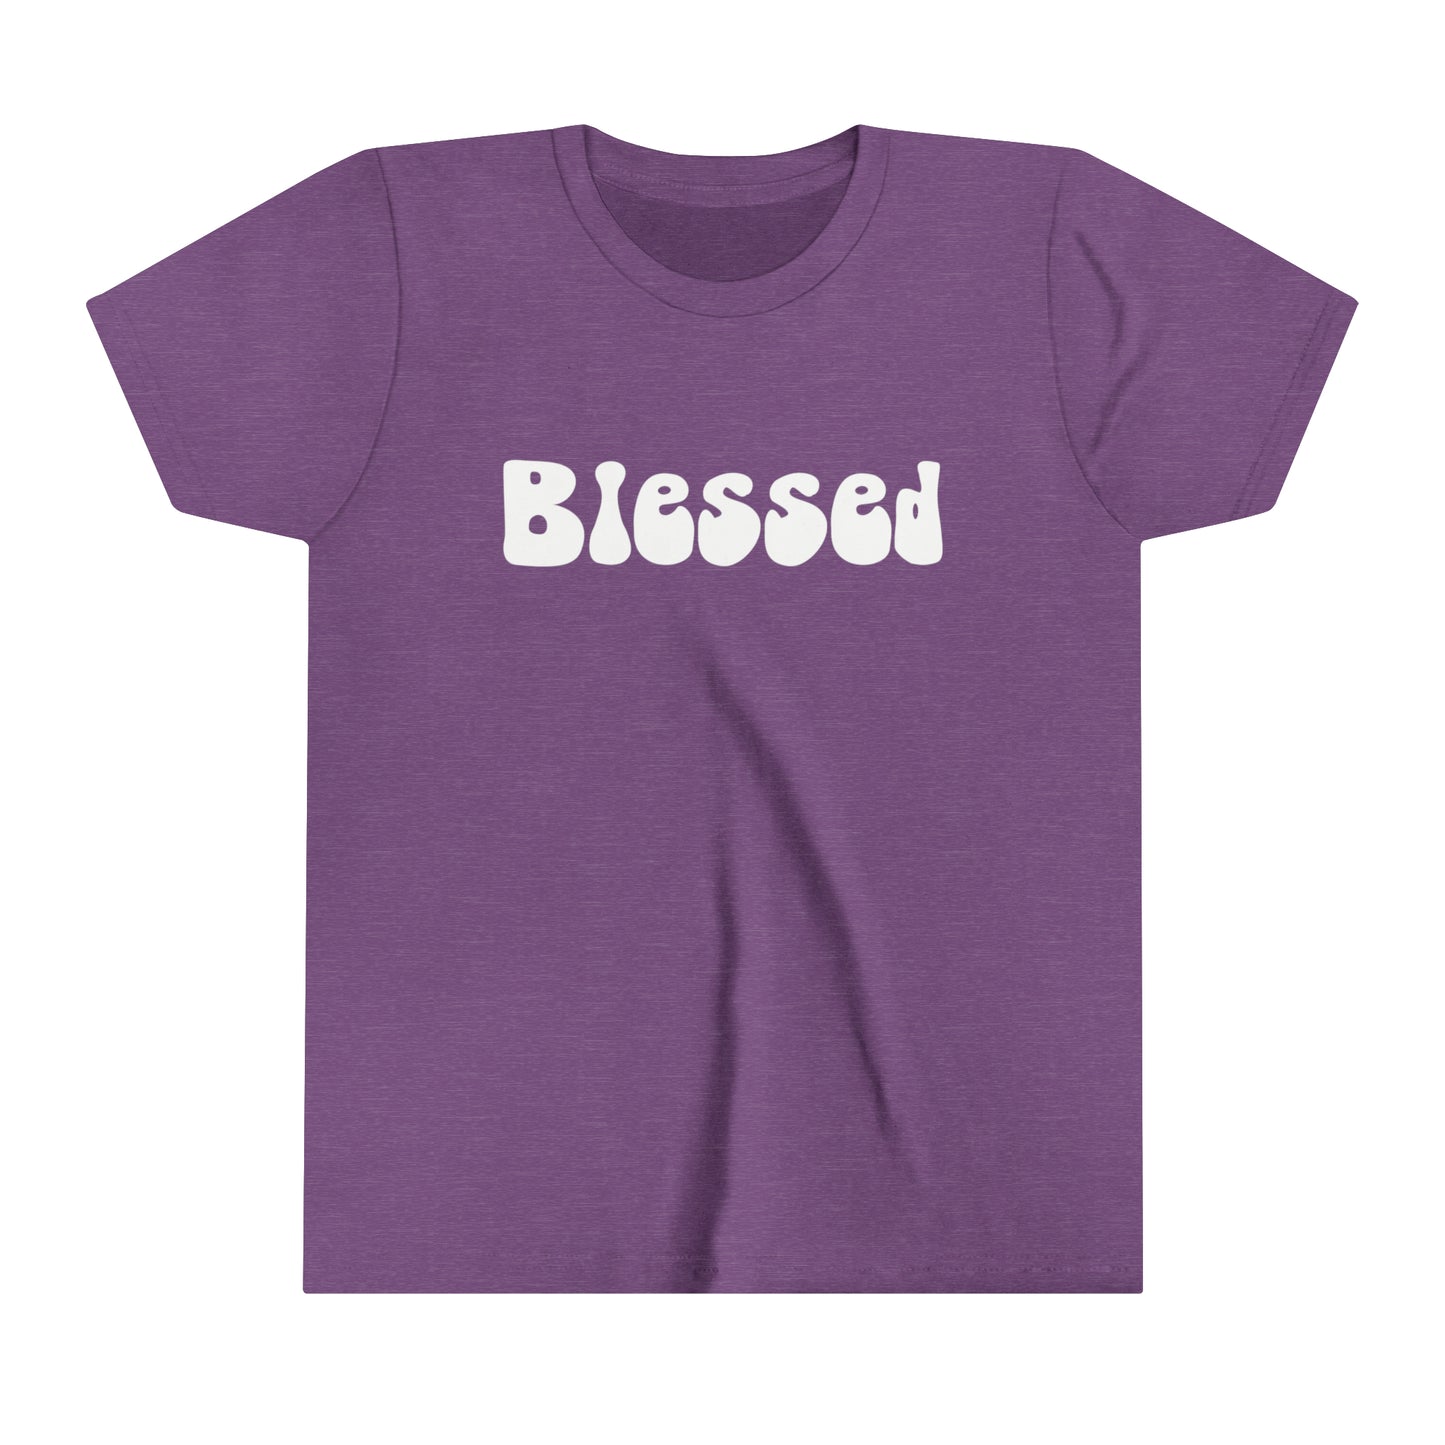 Groovy Blessed T-Shirt - Youth